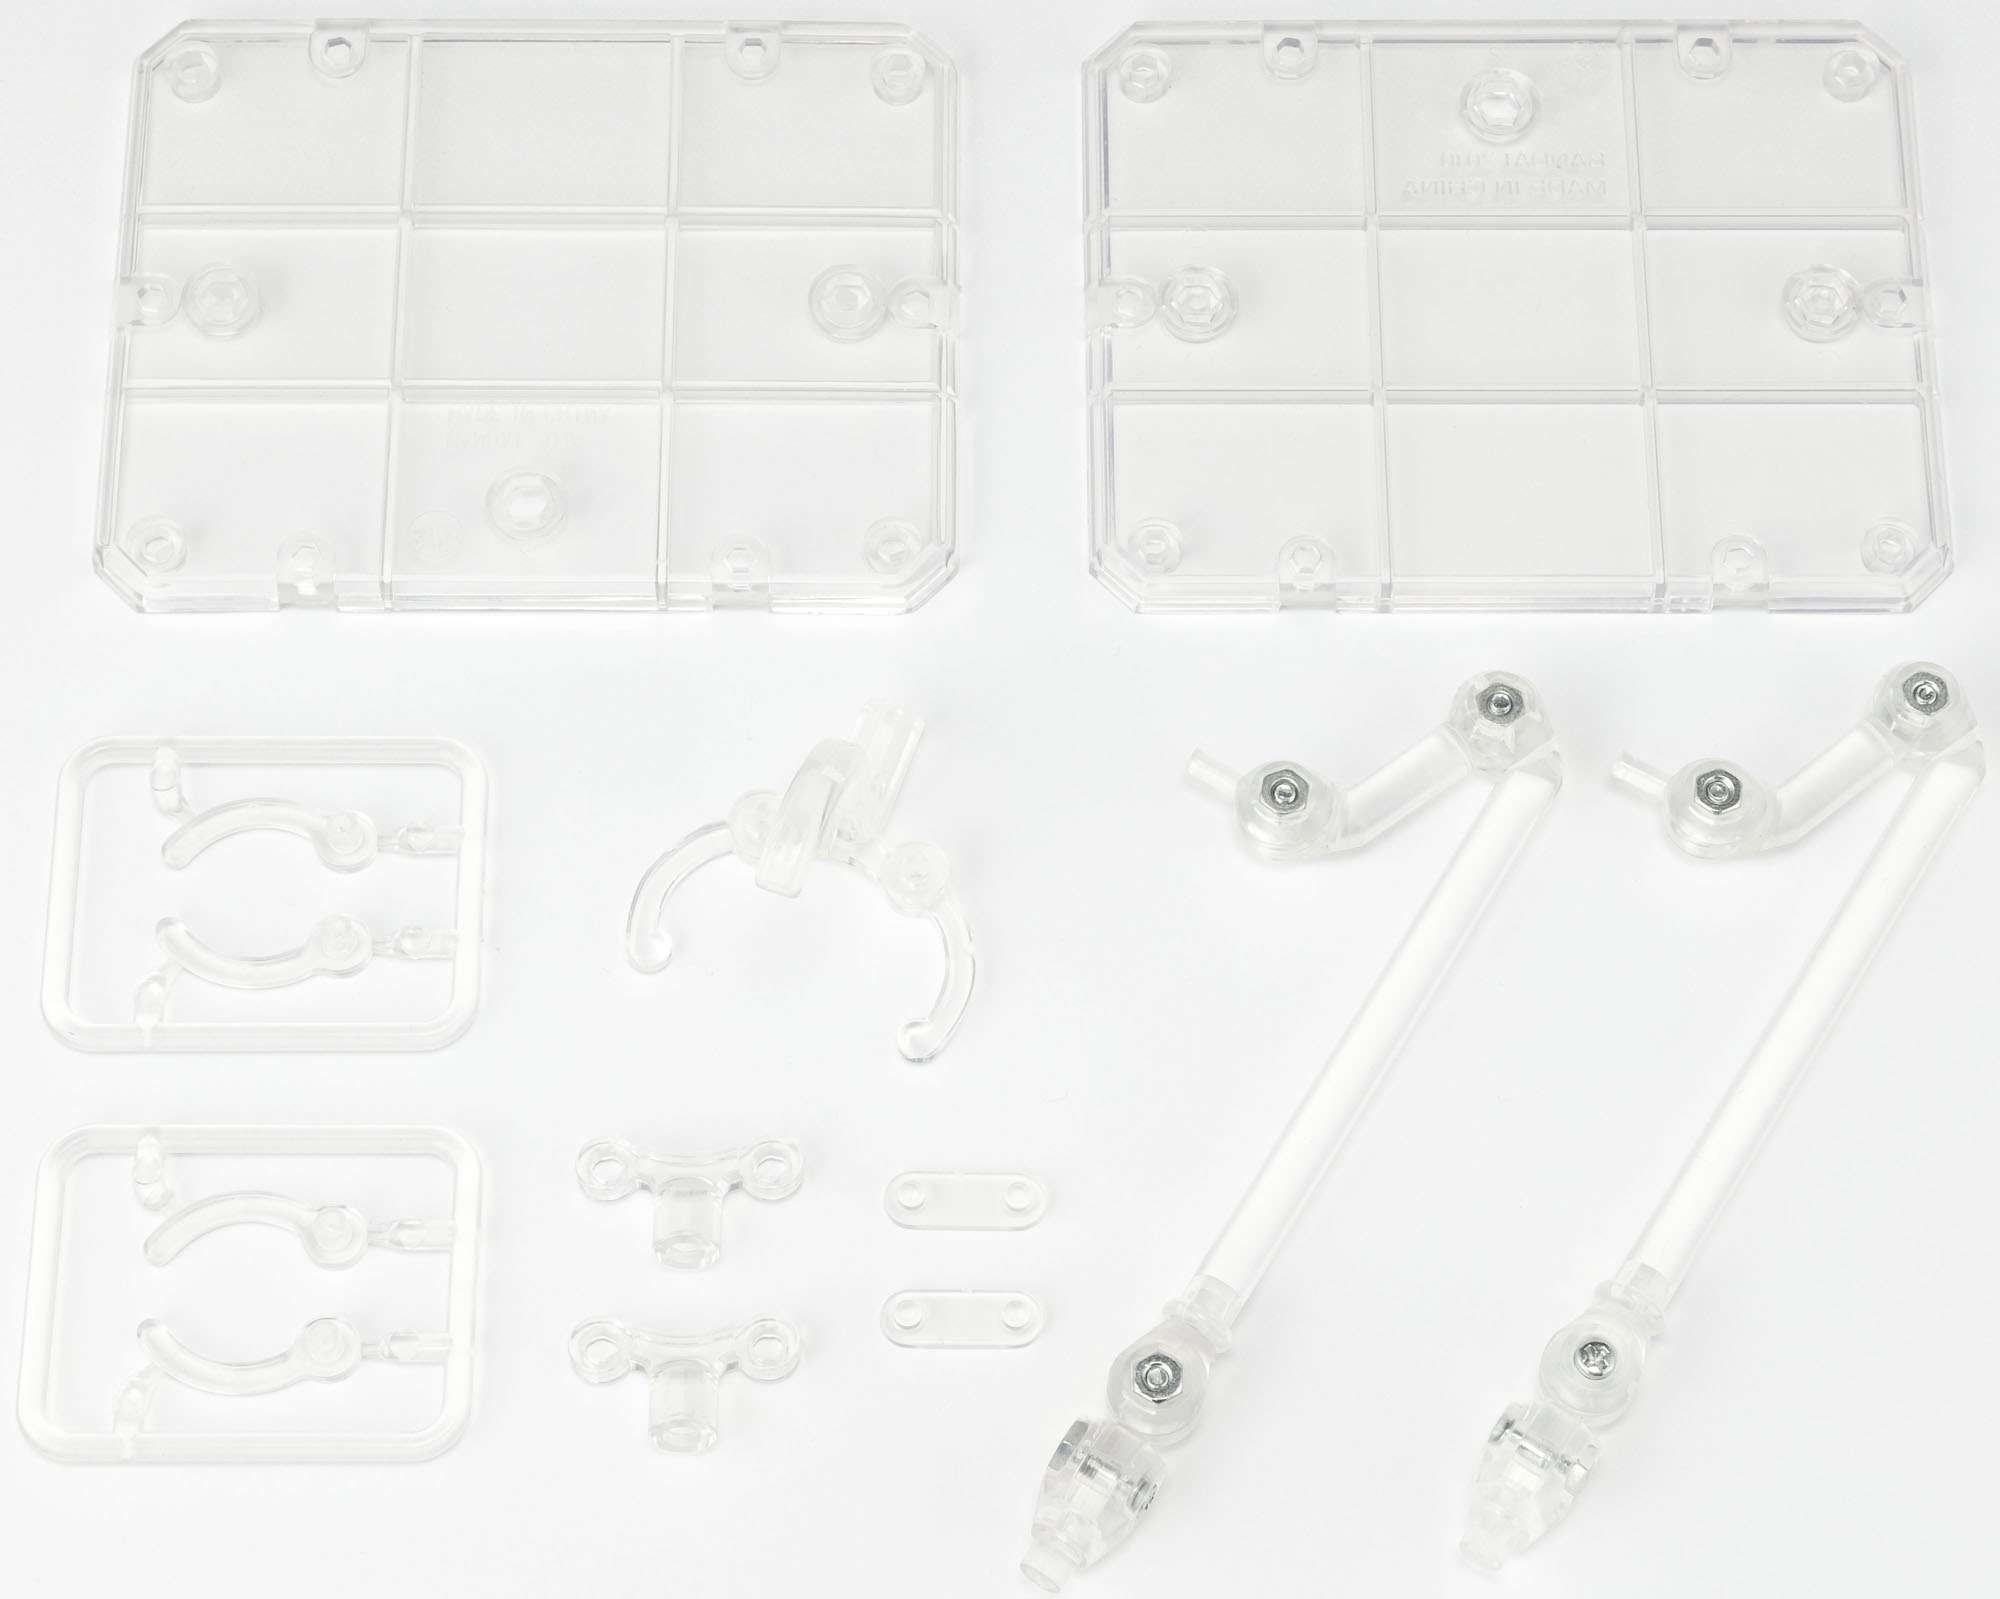 Tamashii Nations - Stage Act. 4 for Humanoid Stand Support (Clear) (2 Stands)  - Bandai Spirits Official S.H.Figuarts Stand 